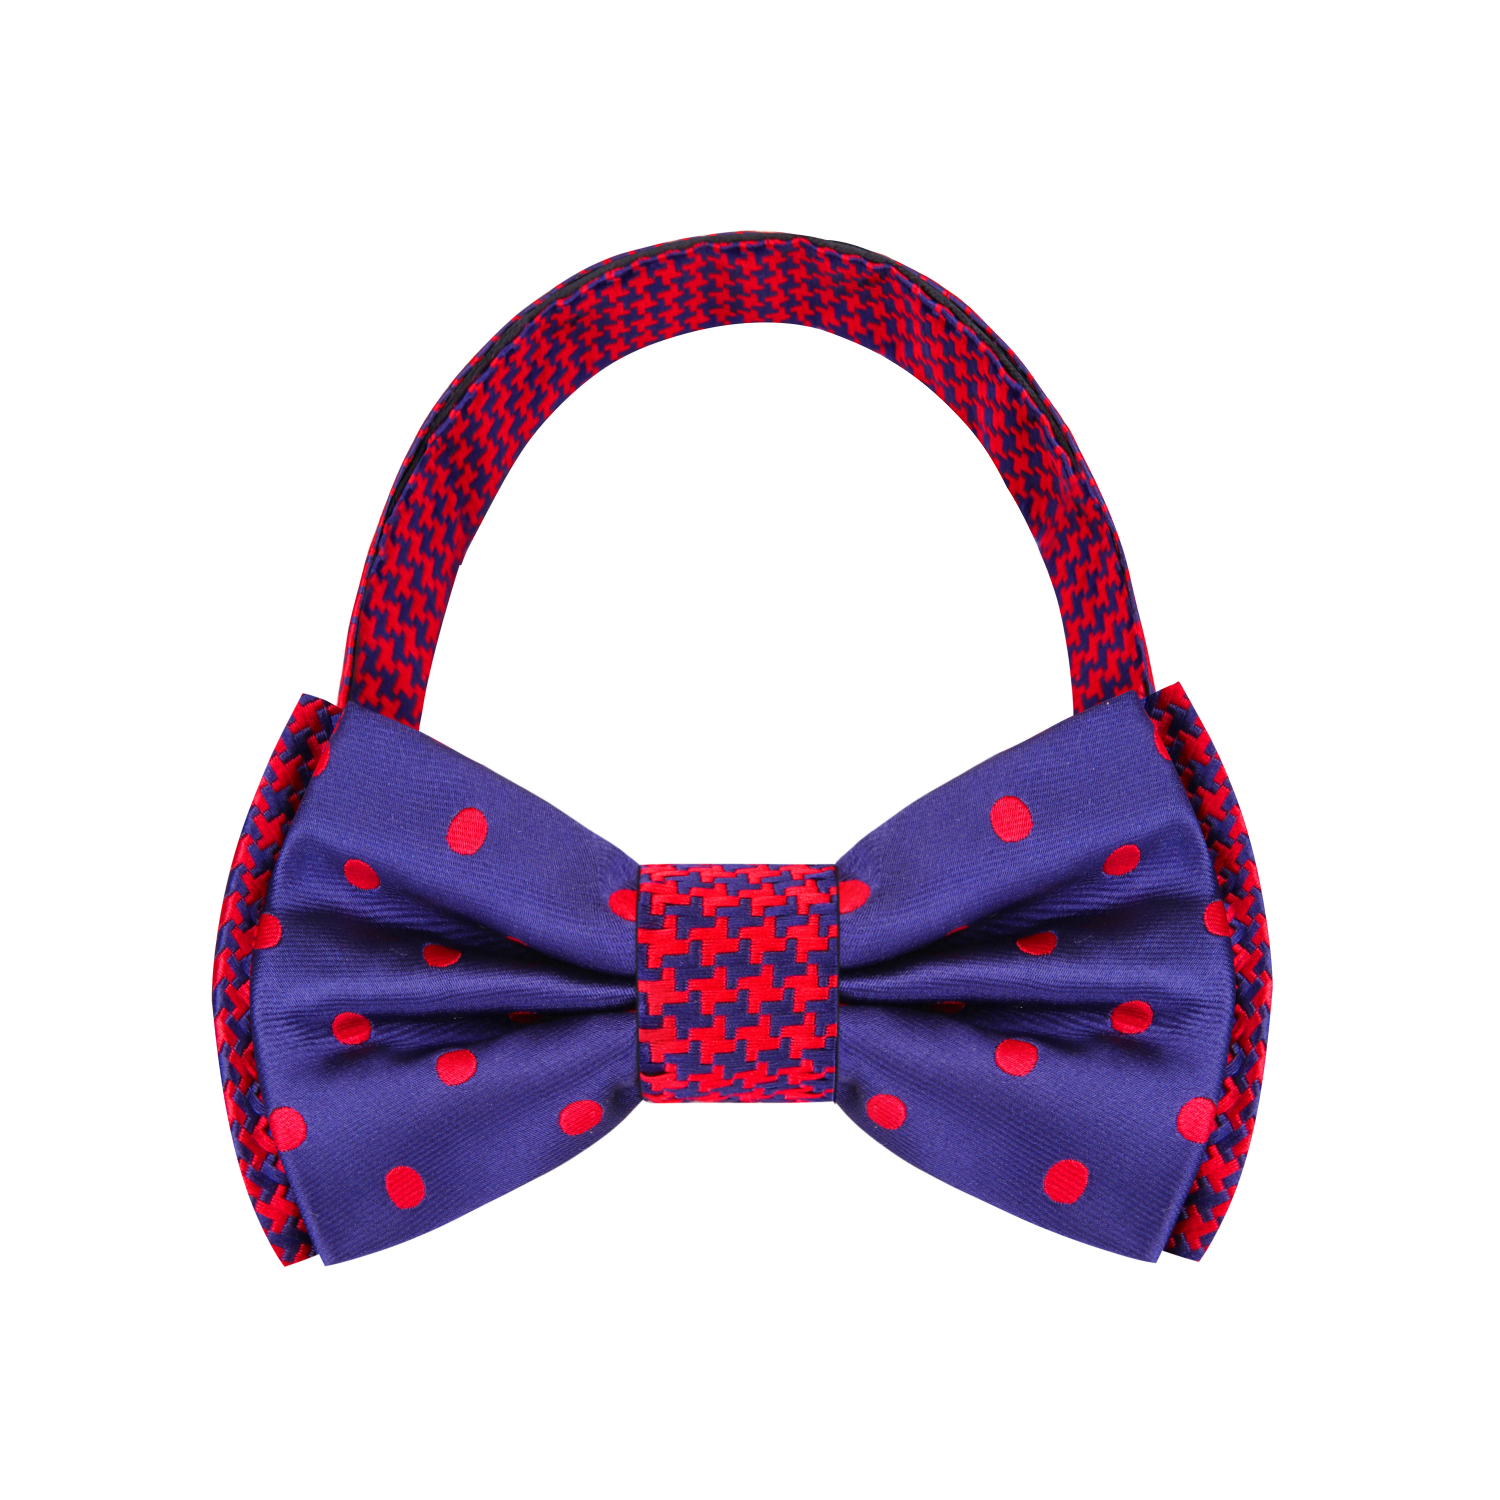 Blue, Red Dots Bow Tie Pre Tied